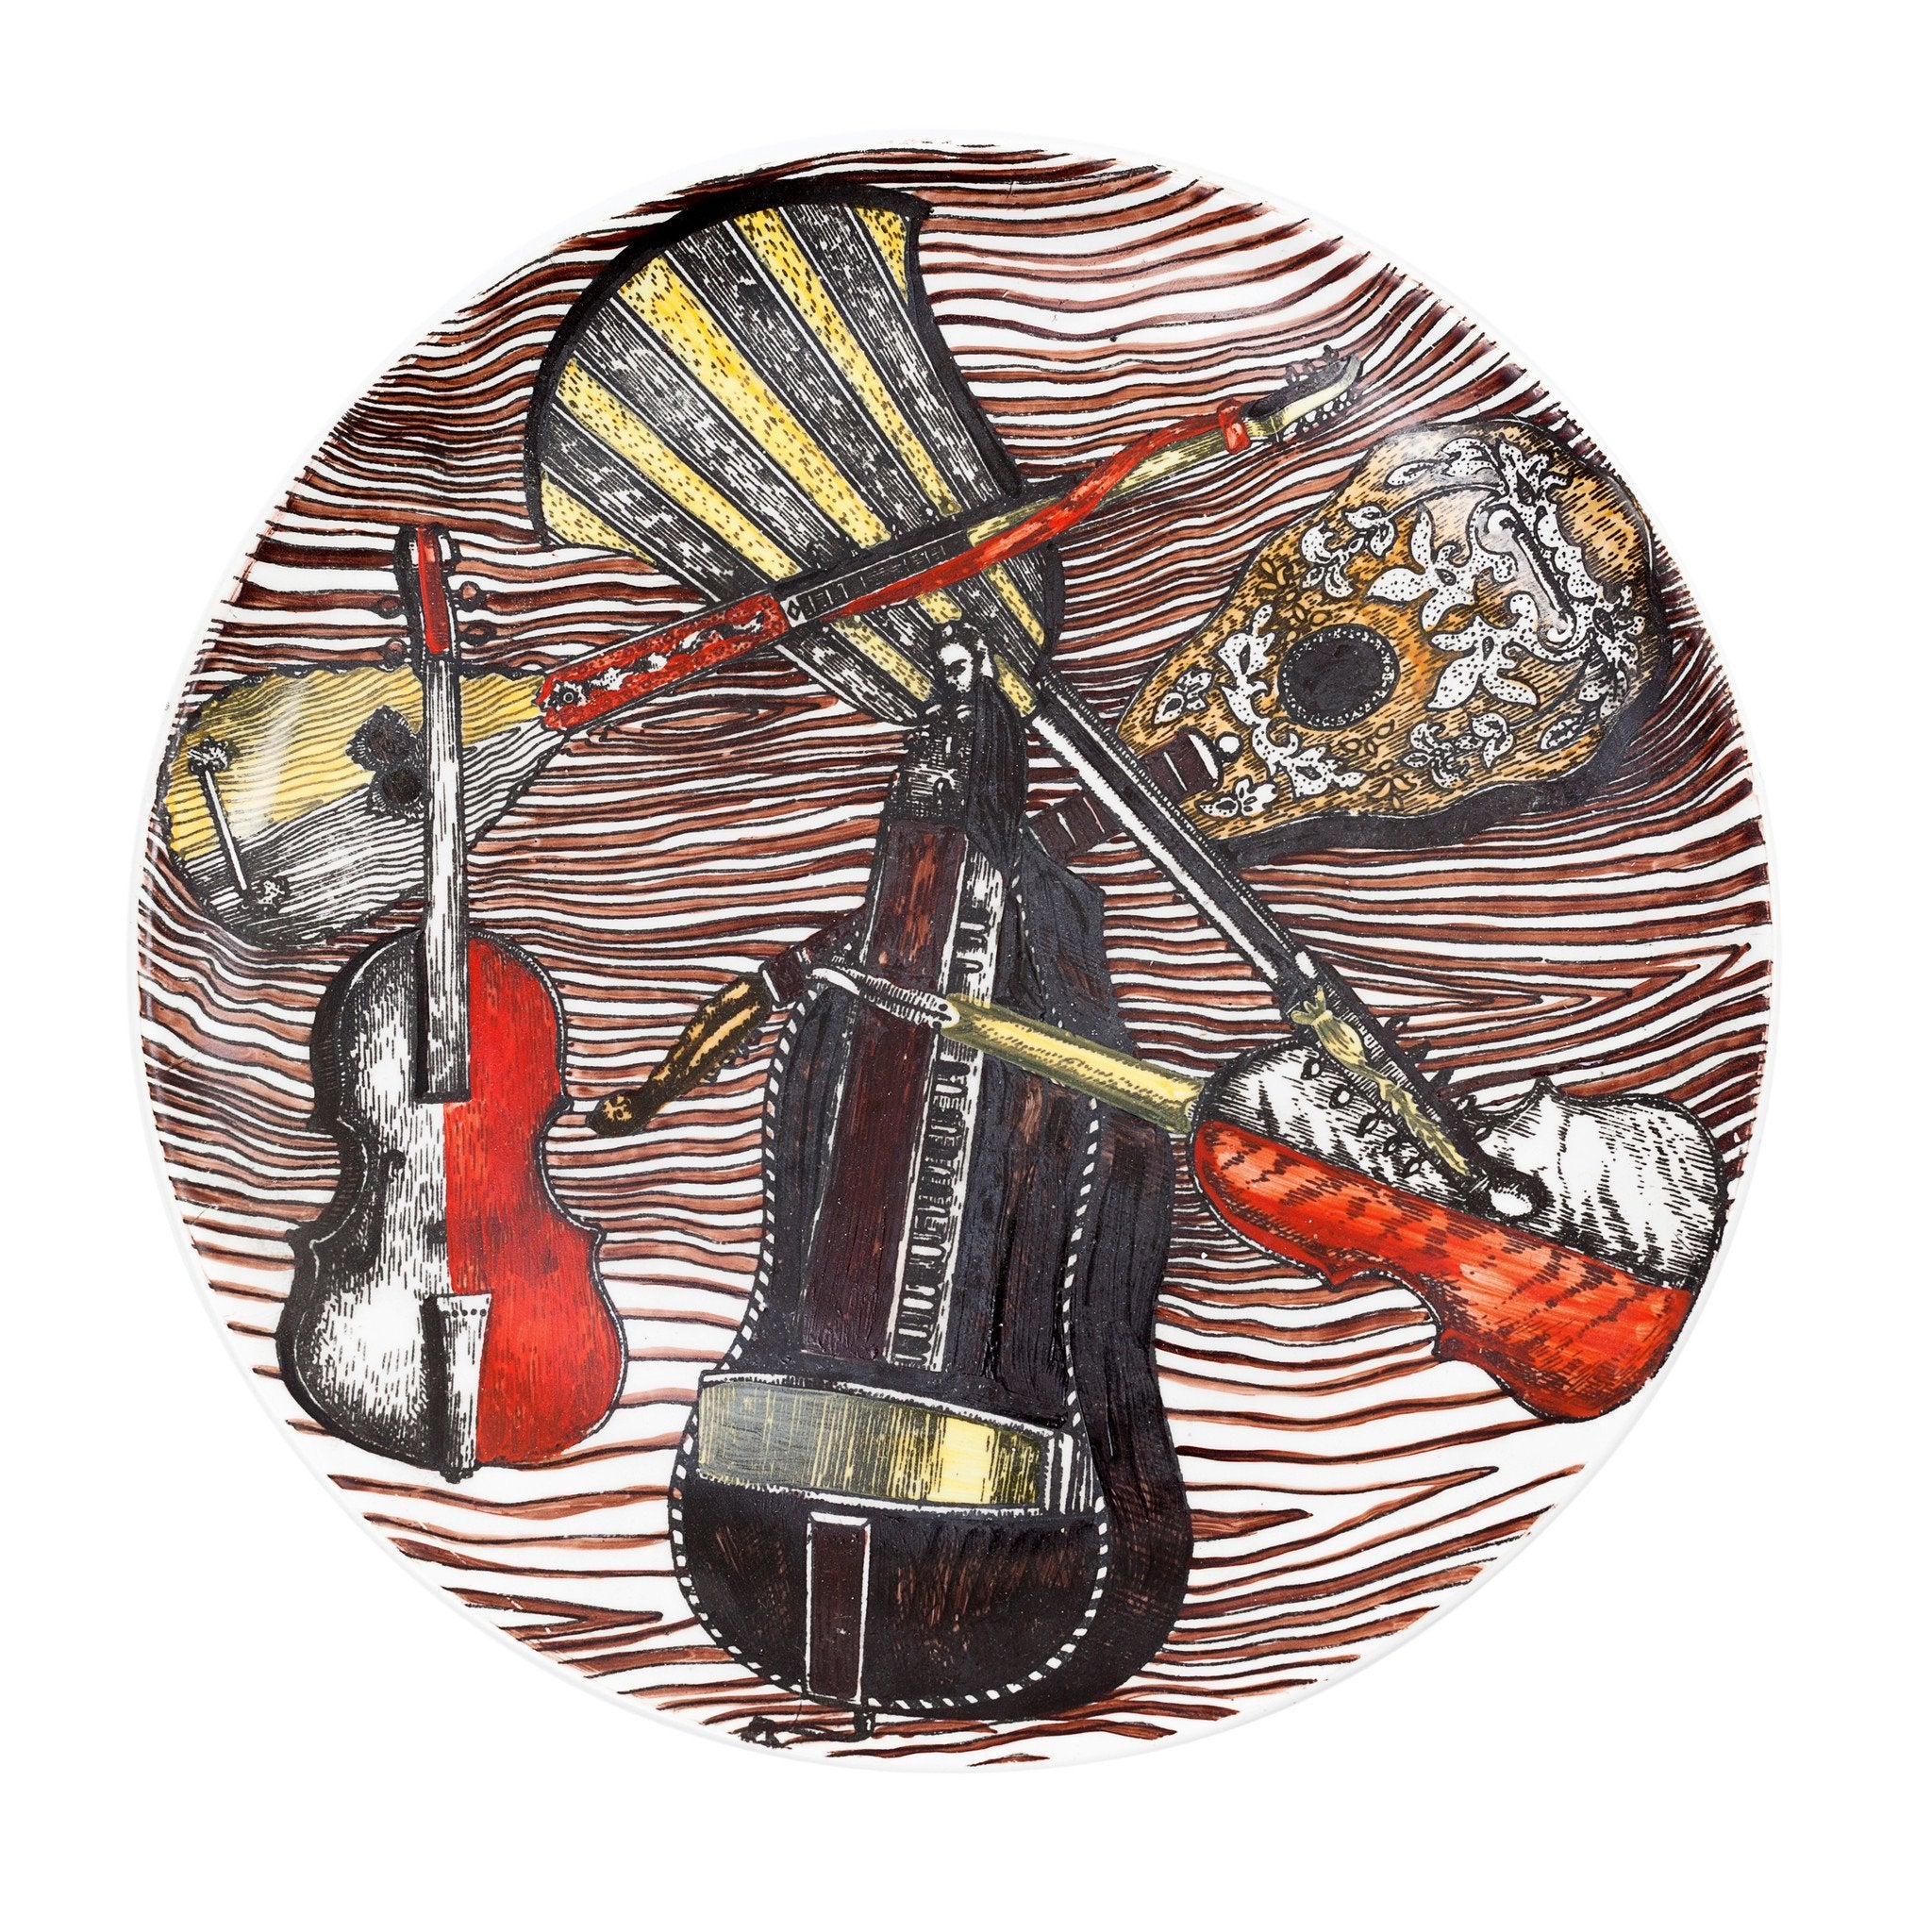 Piero Fornasetti, a Set of 6 "Musical Instruments" Dishes, 1953 - ONEROOM